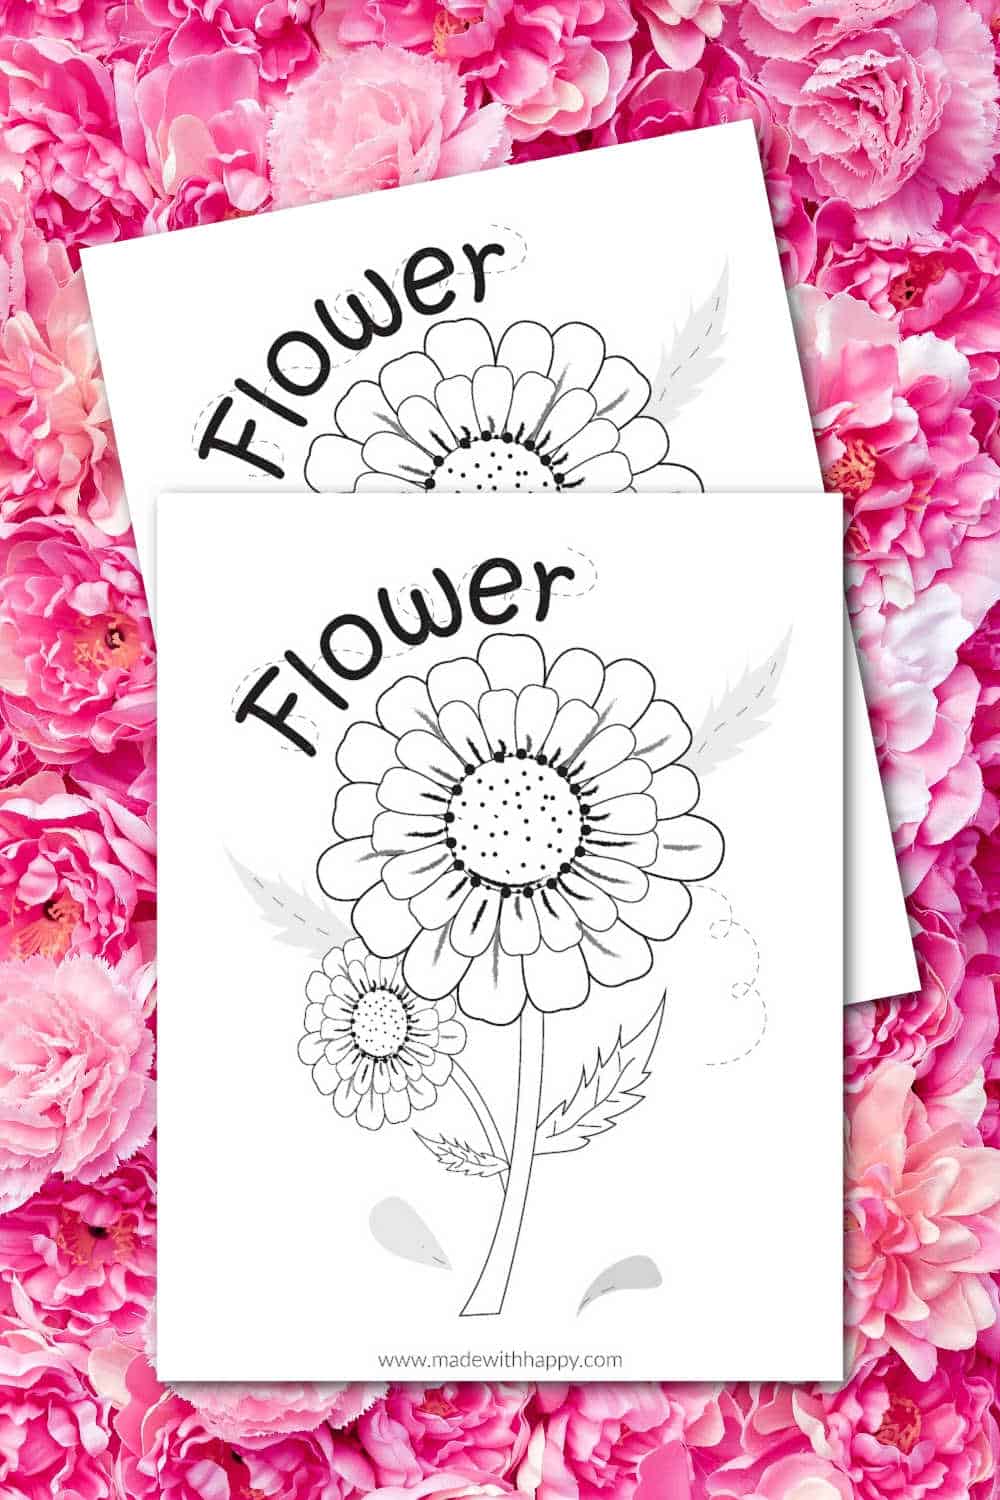 https://www.madewithhappy.com/wp-content/uploads/Flower-Coloring-Page-2.jpg